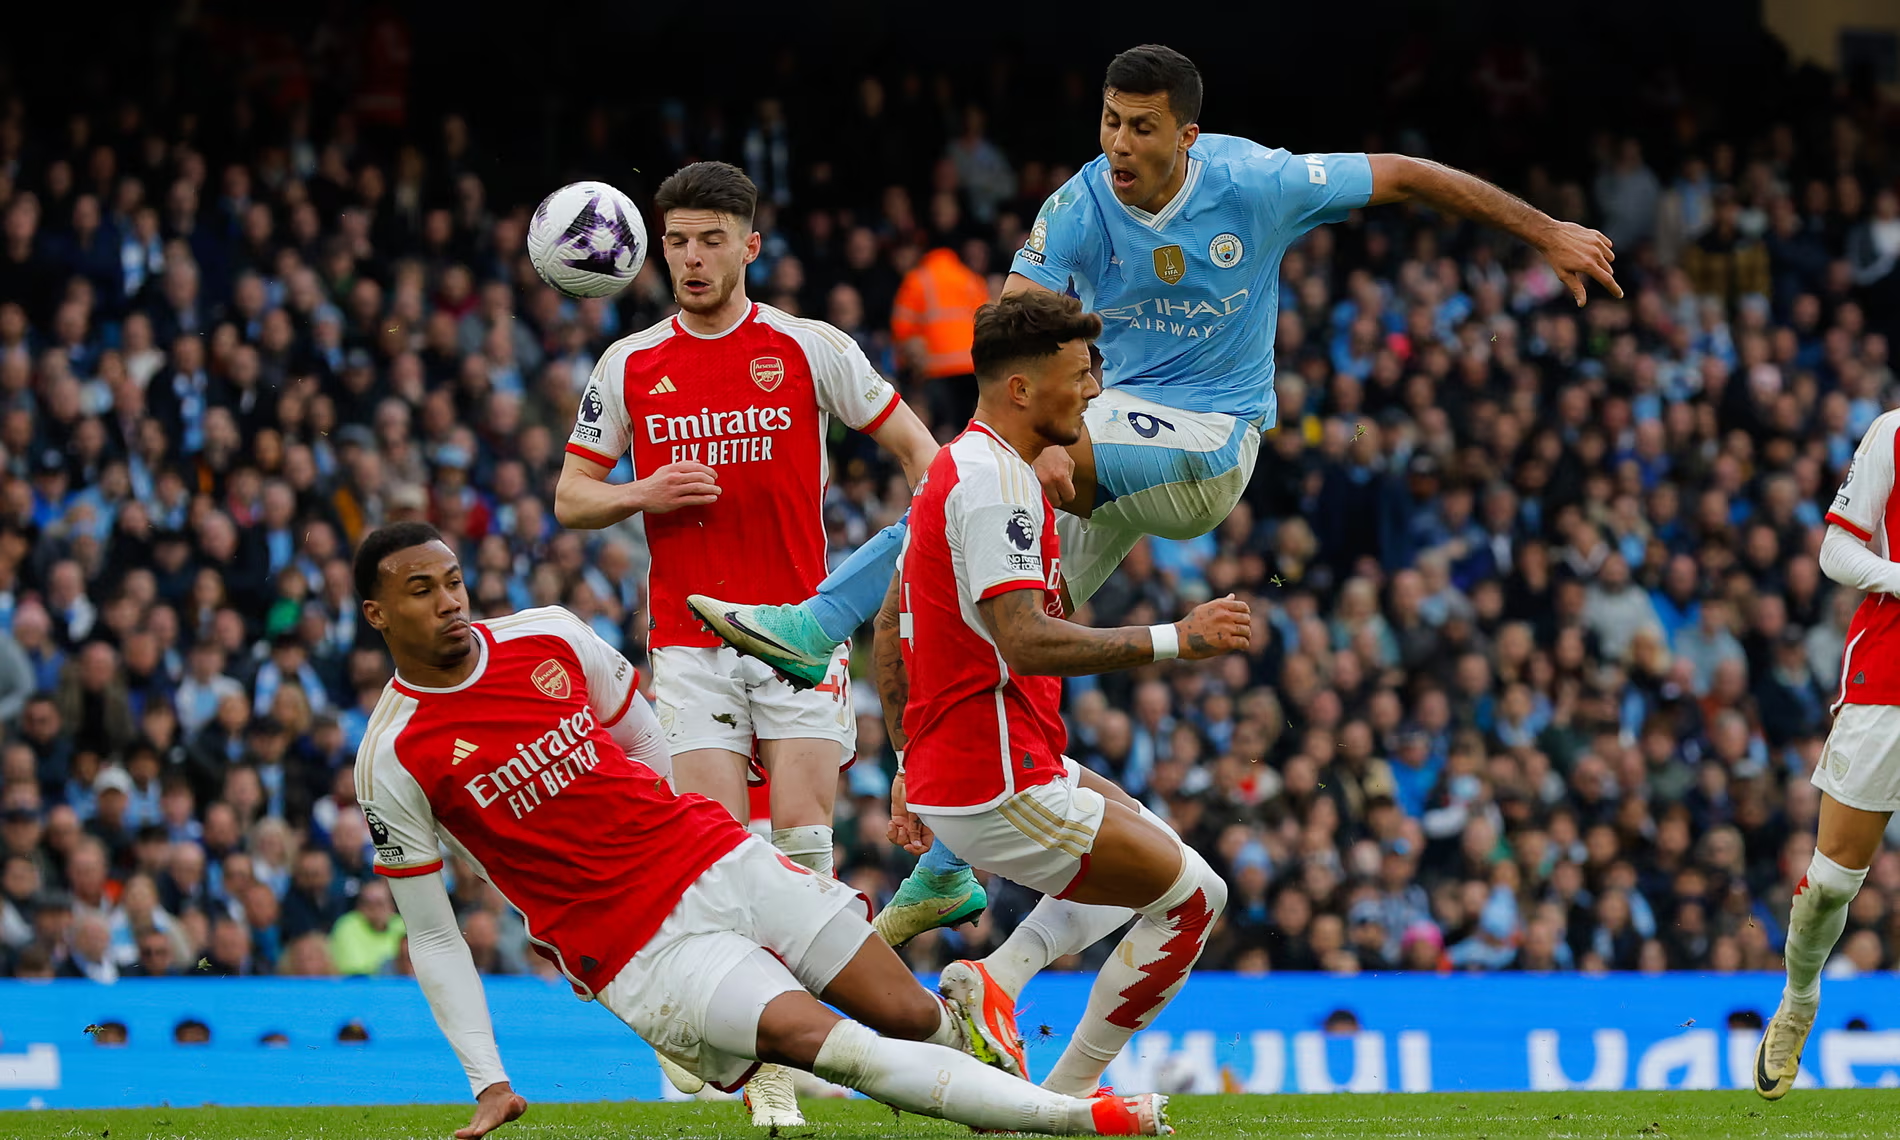 EPL title race: Arsenal hold Manchester City to leave Liverpool with title advantage